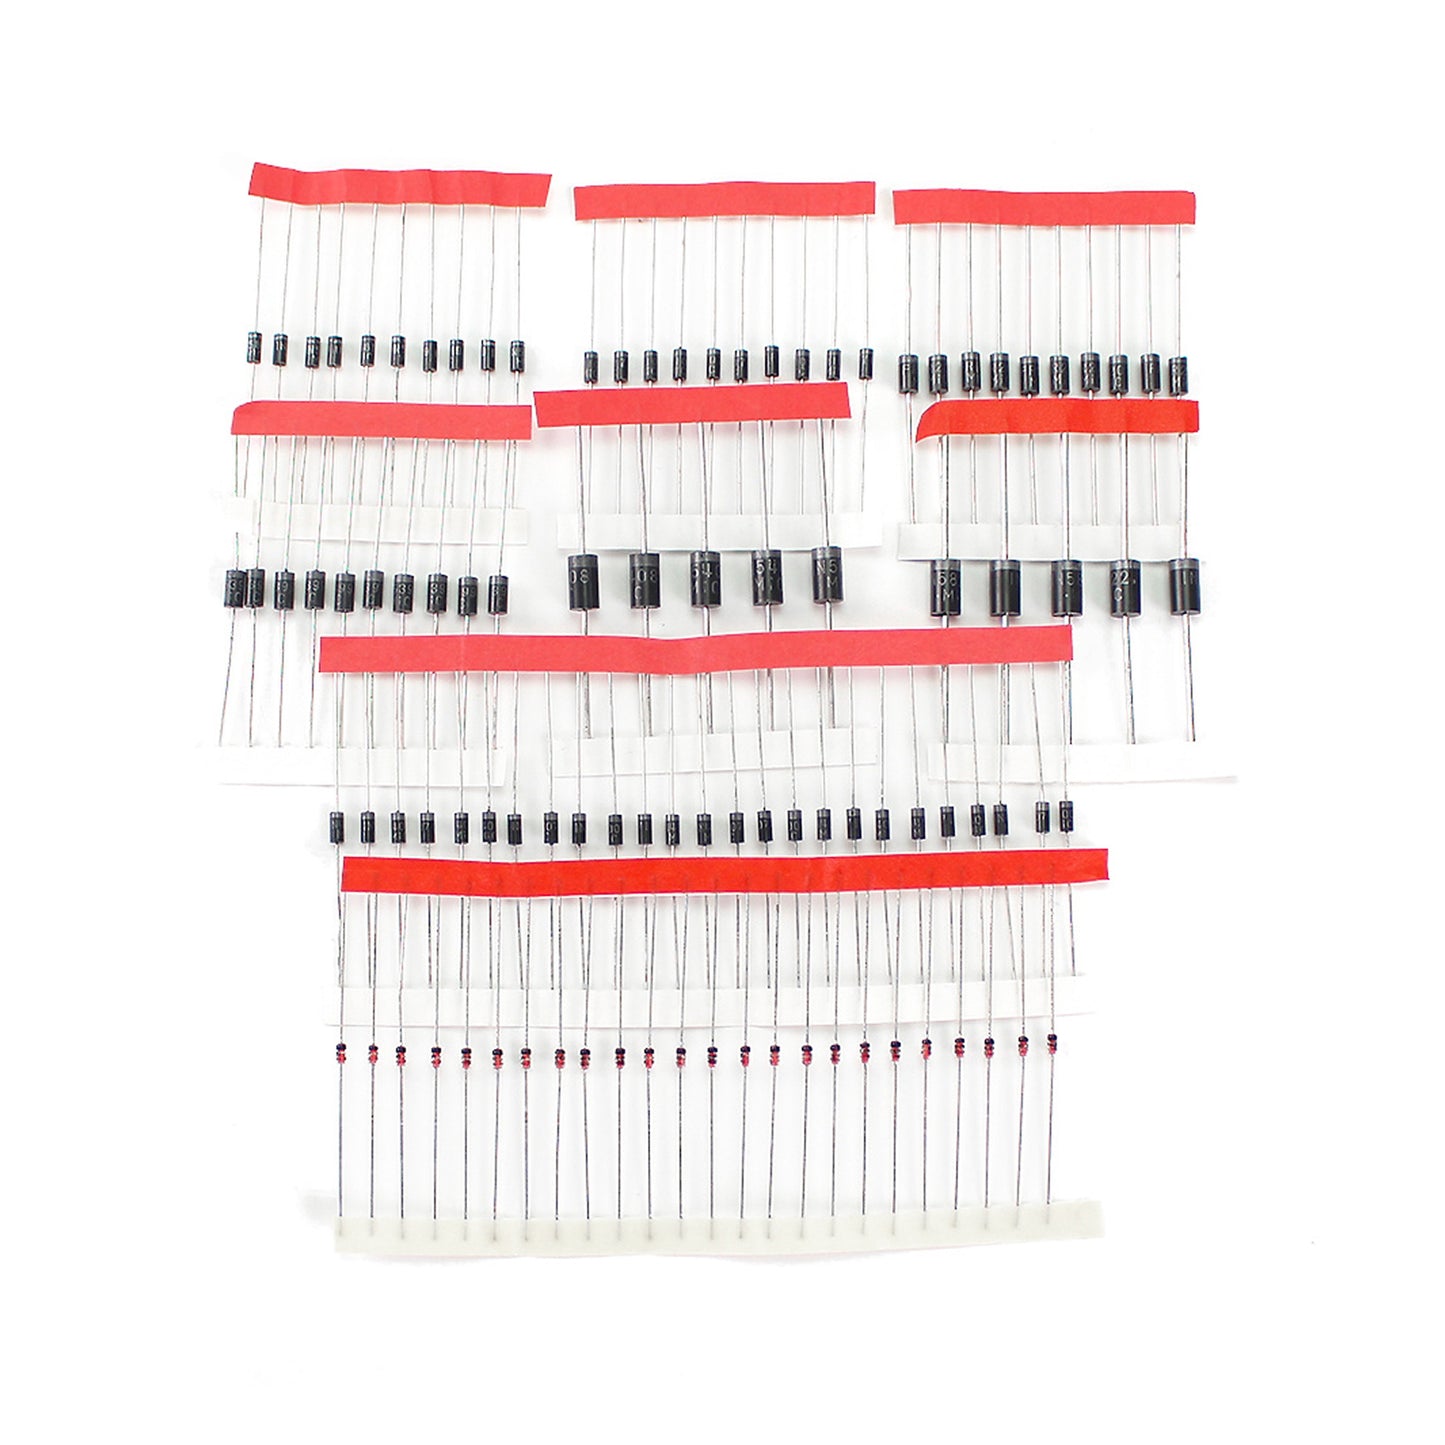 100pcs Diode Assorted Kit 8 Values DIY Electronic Components Diode Assortment Standard Recovery Power Rectifier -RS1706 - REES52